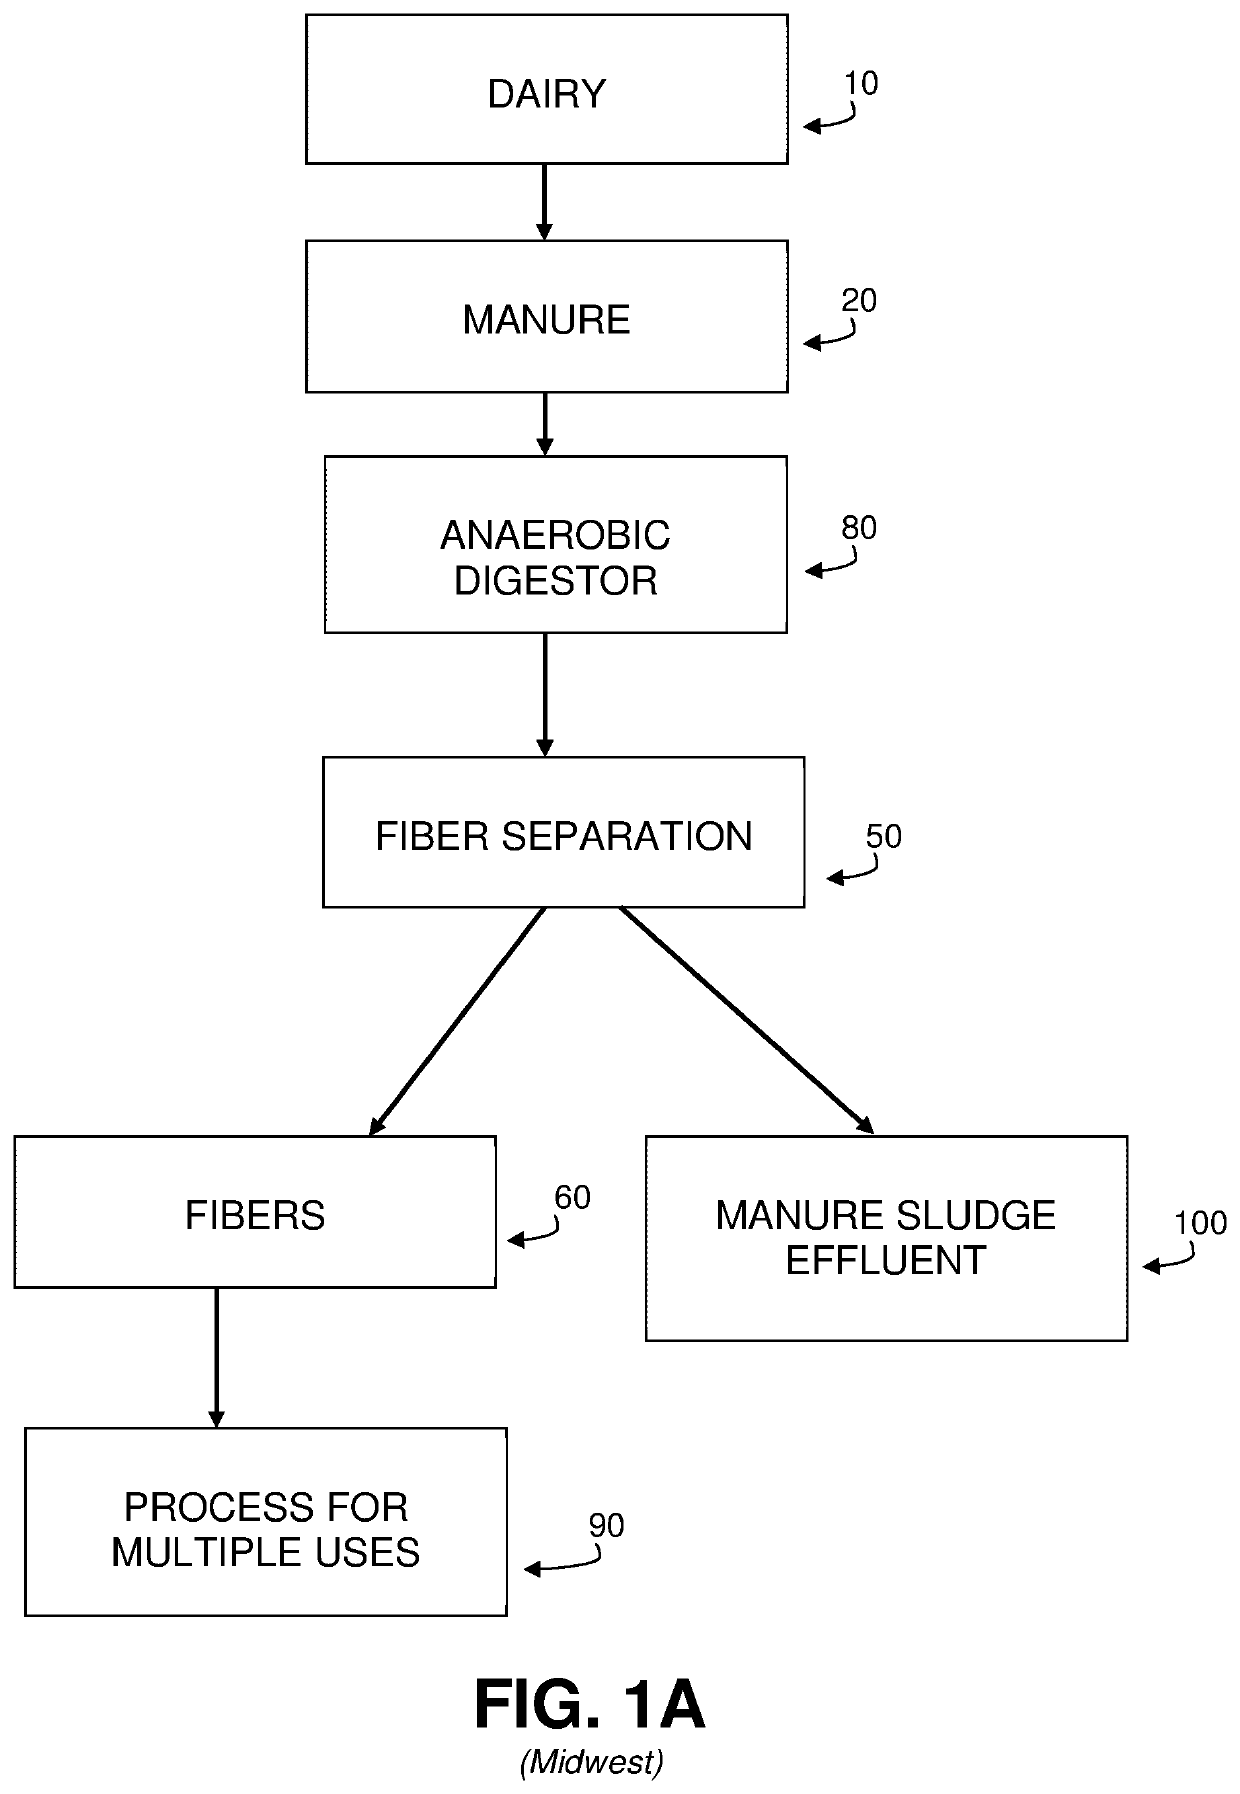 Systems and methods for treating dairy waste